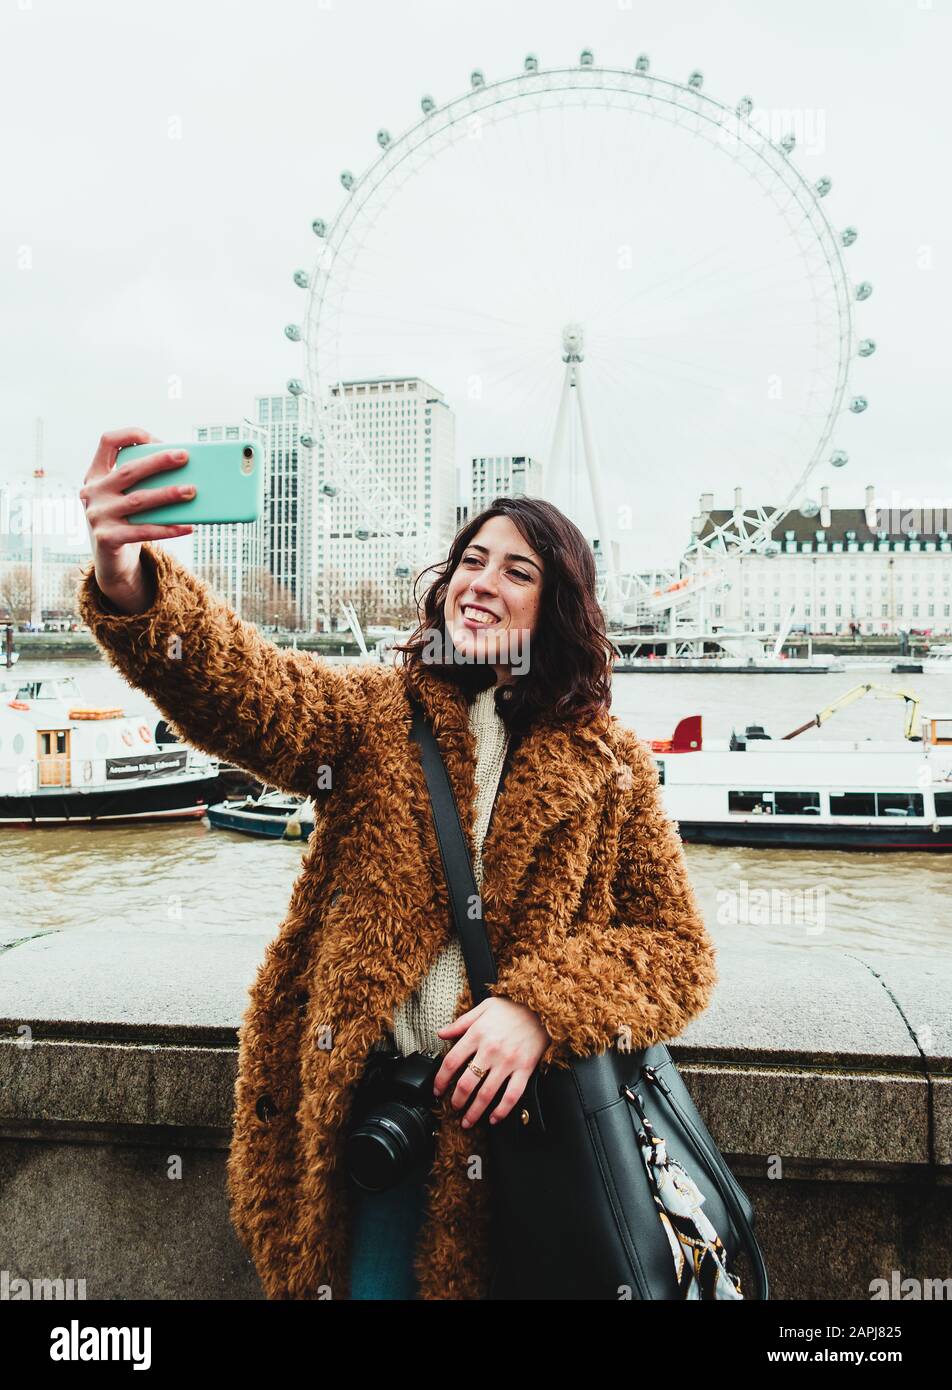 Young woman taking a selfie with the London Eye in the background Stock Photo